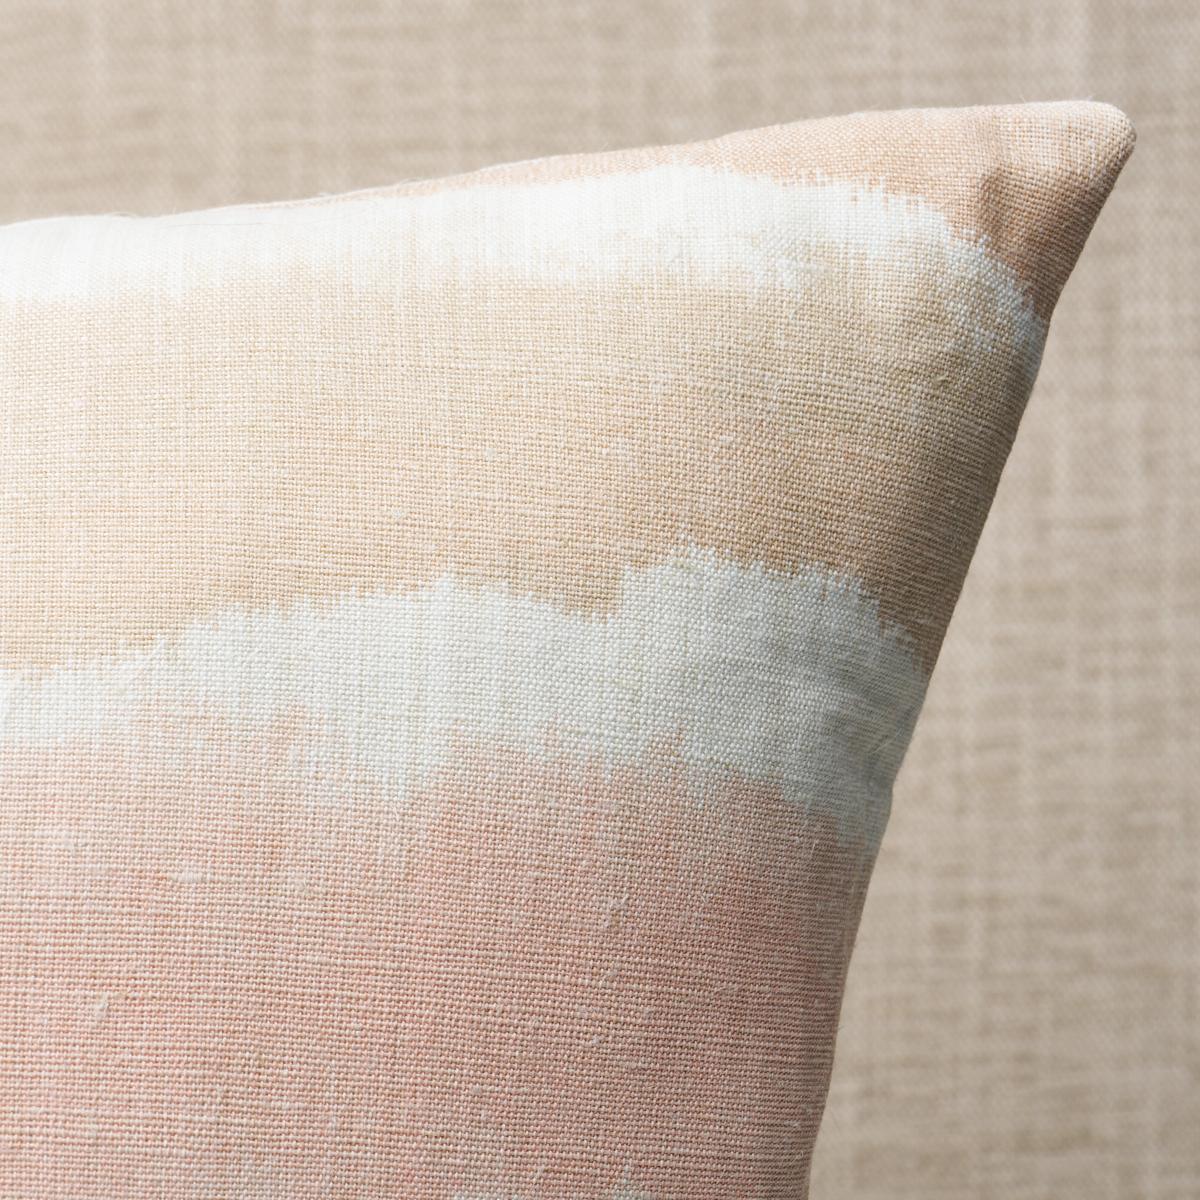 This pillow features Chandler Warp Print with a knife edge finish. Only a true warp print could achieve the ethereal effect that makes this soft horizontal stripe fabric so unique. Pillow includes a feather/down fill insert and hidden zipper closure.